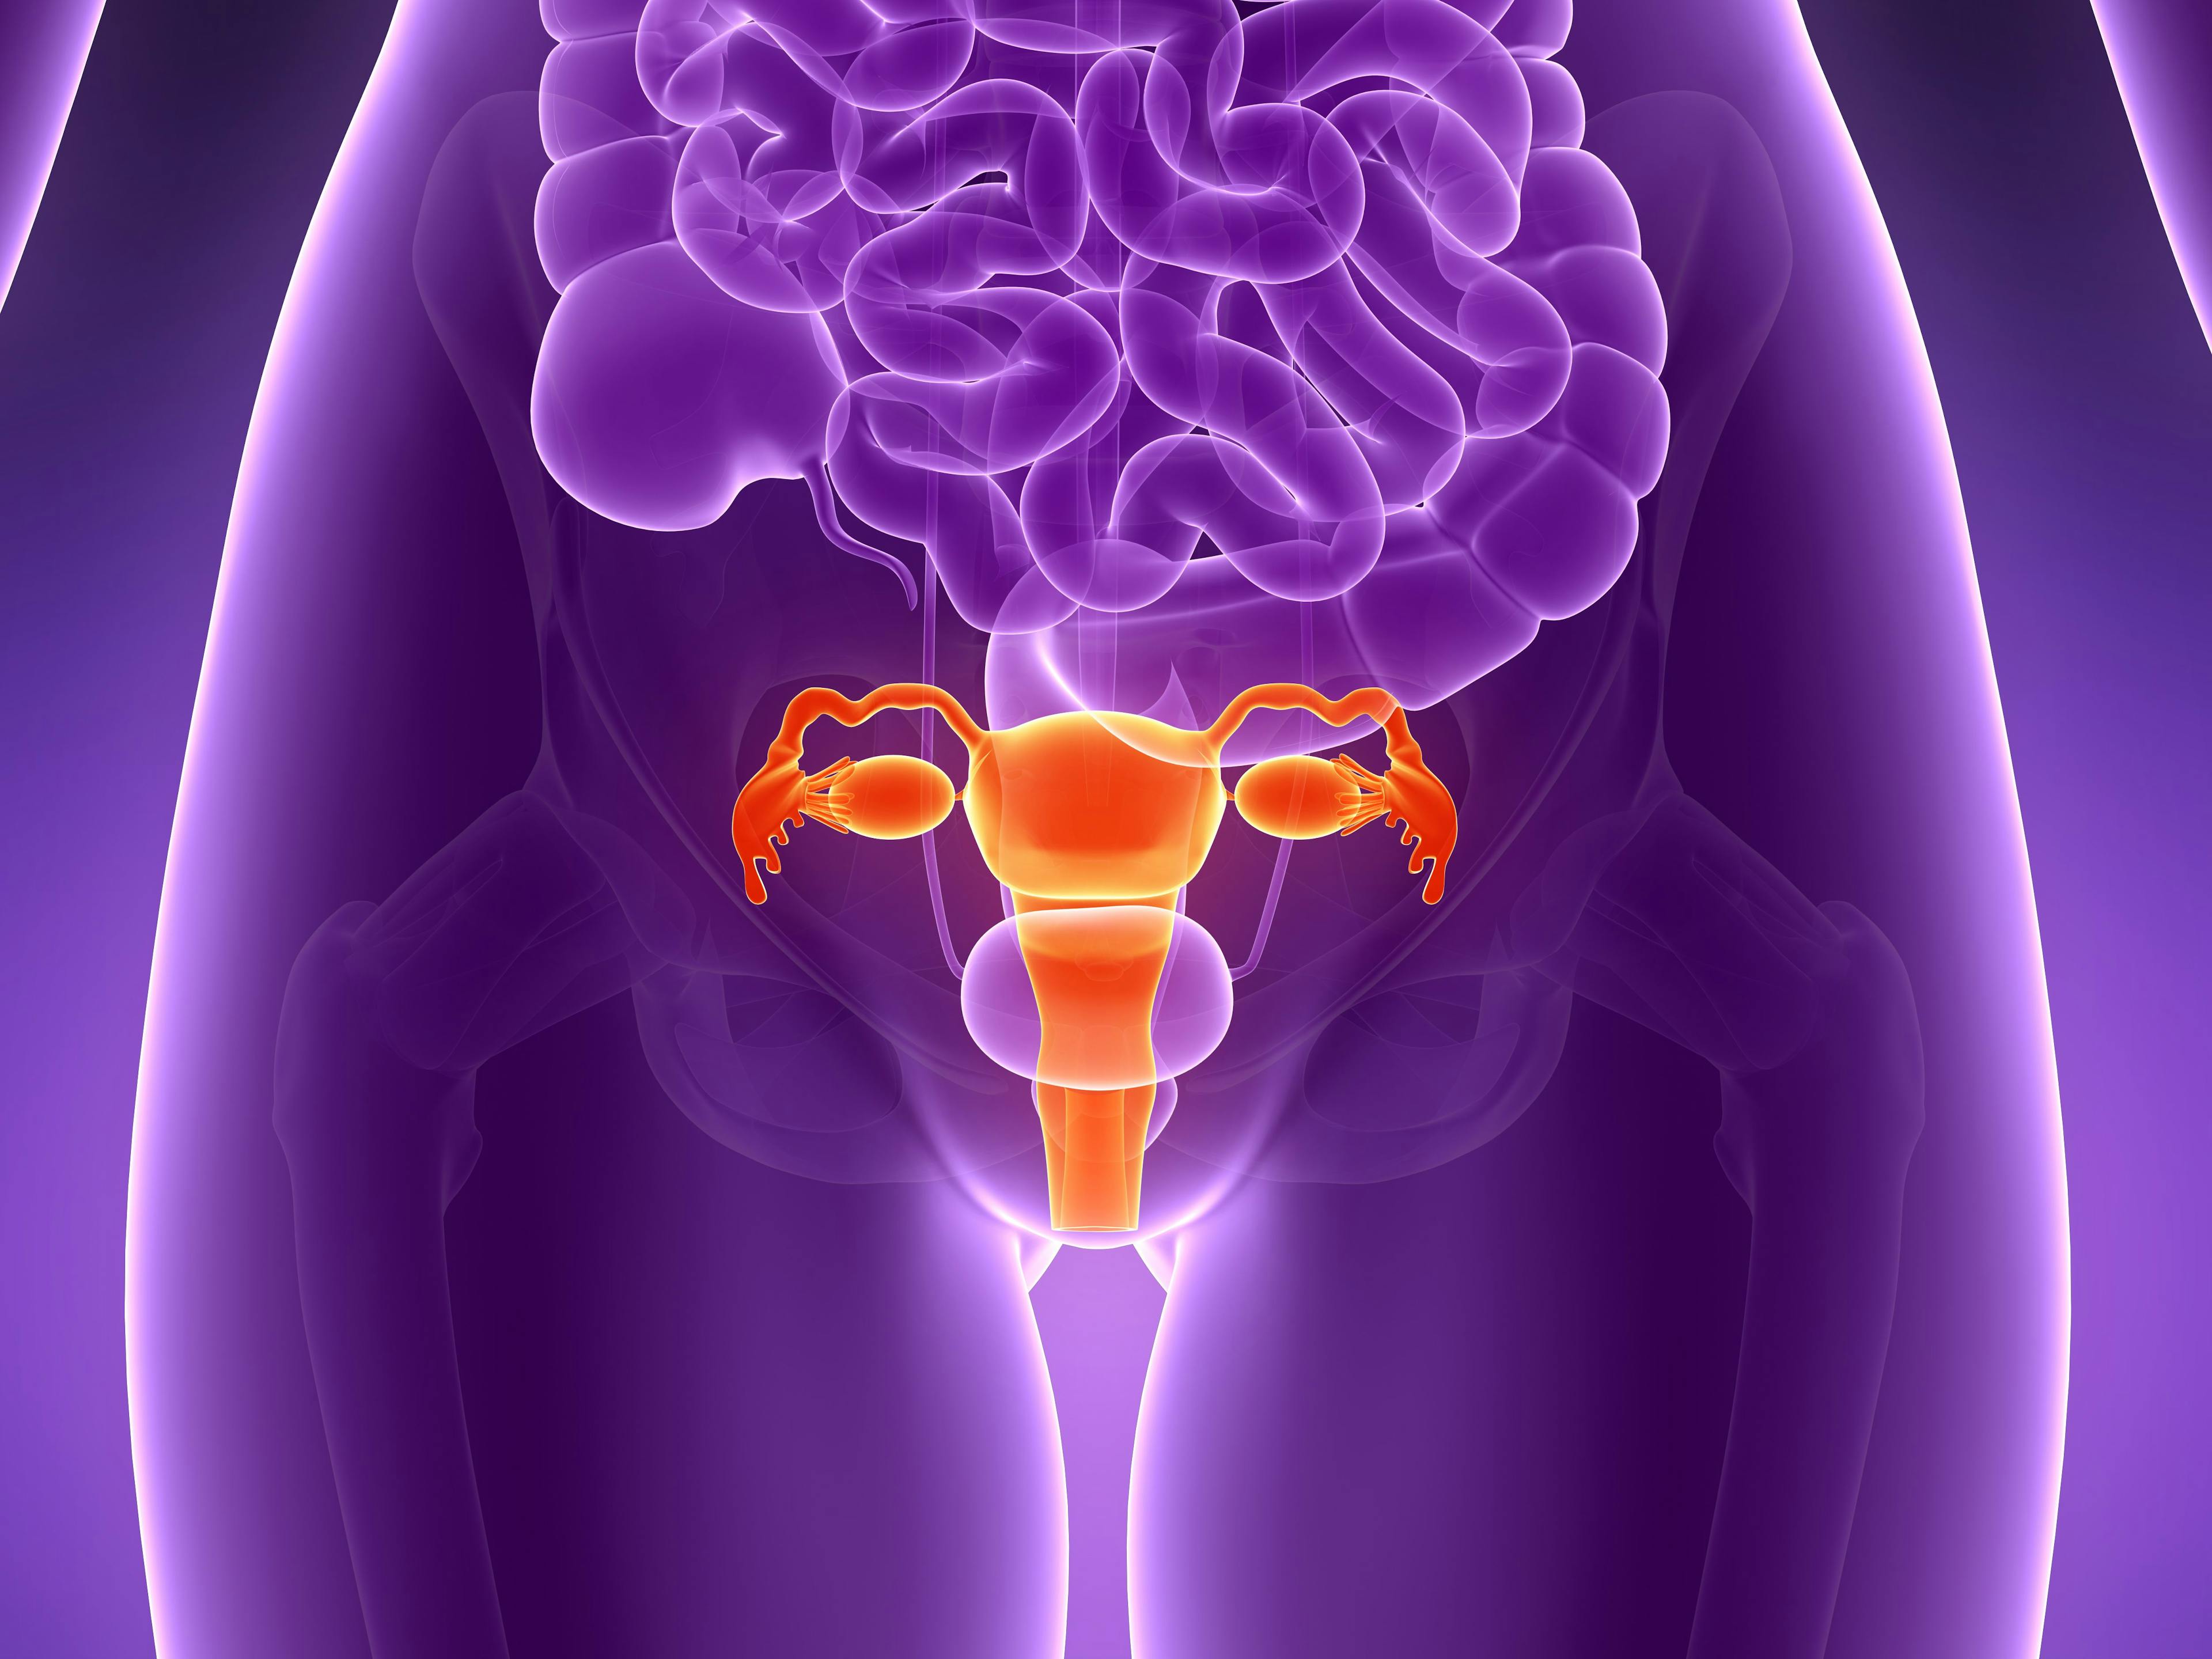 Illustration of a female human reproductive system